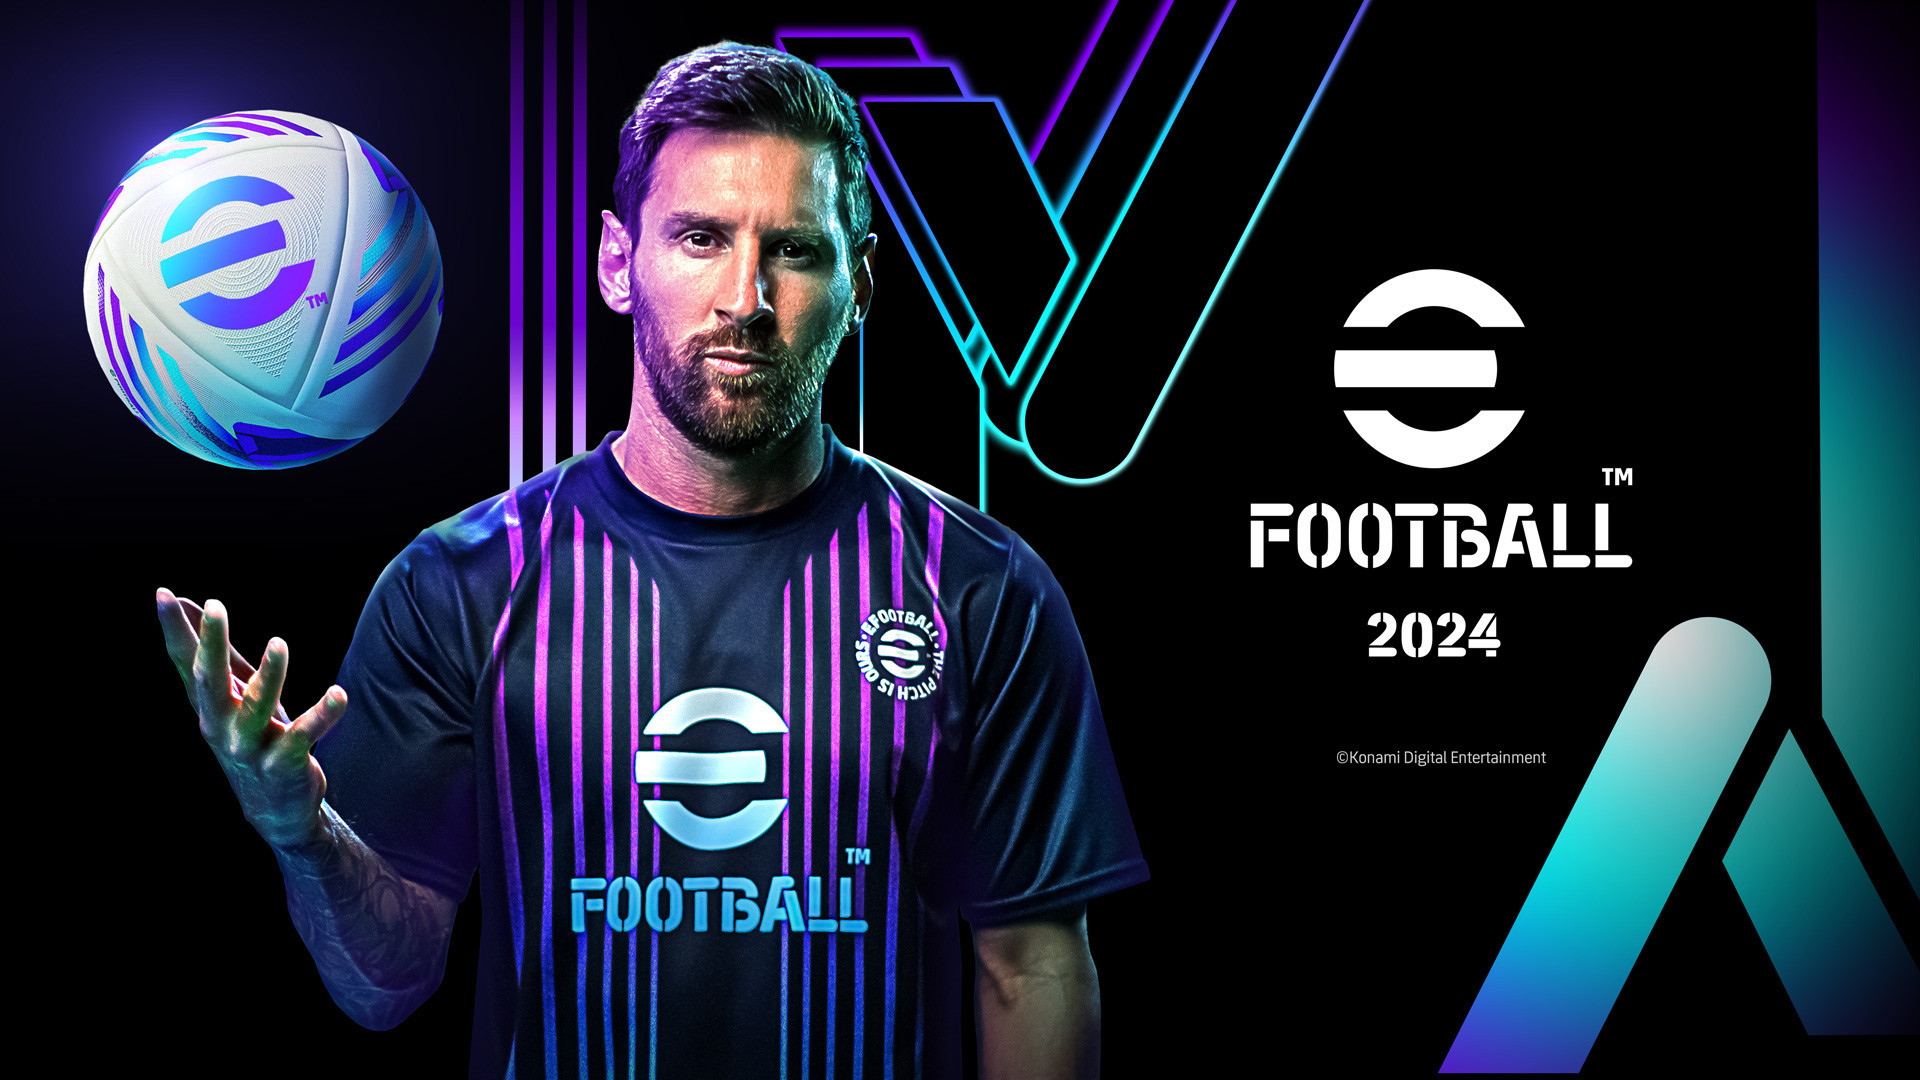 Argentina's Lionel Messi is the cover star for eFootball 2024 ©Konami